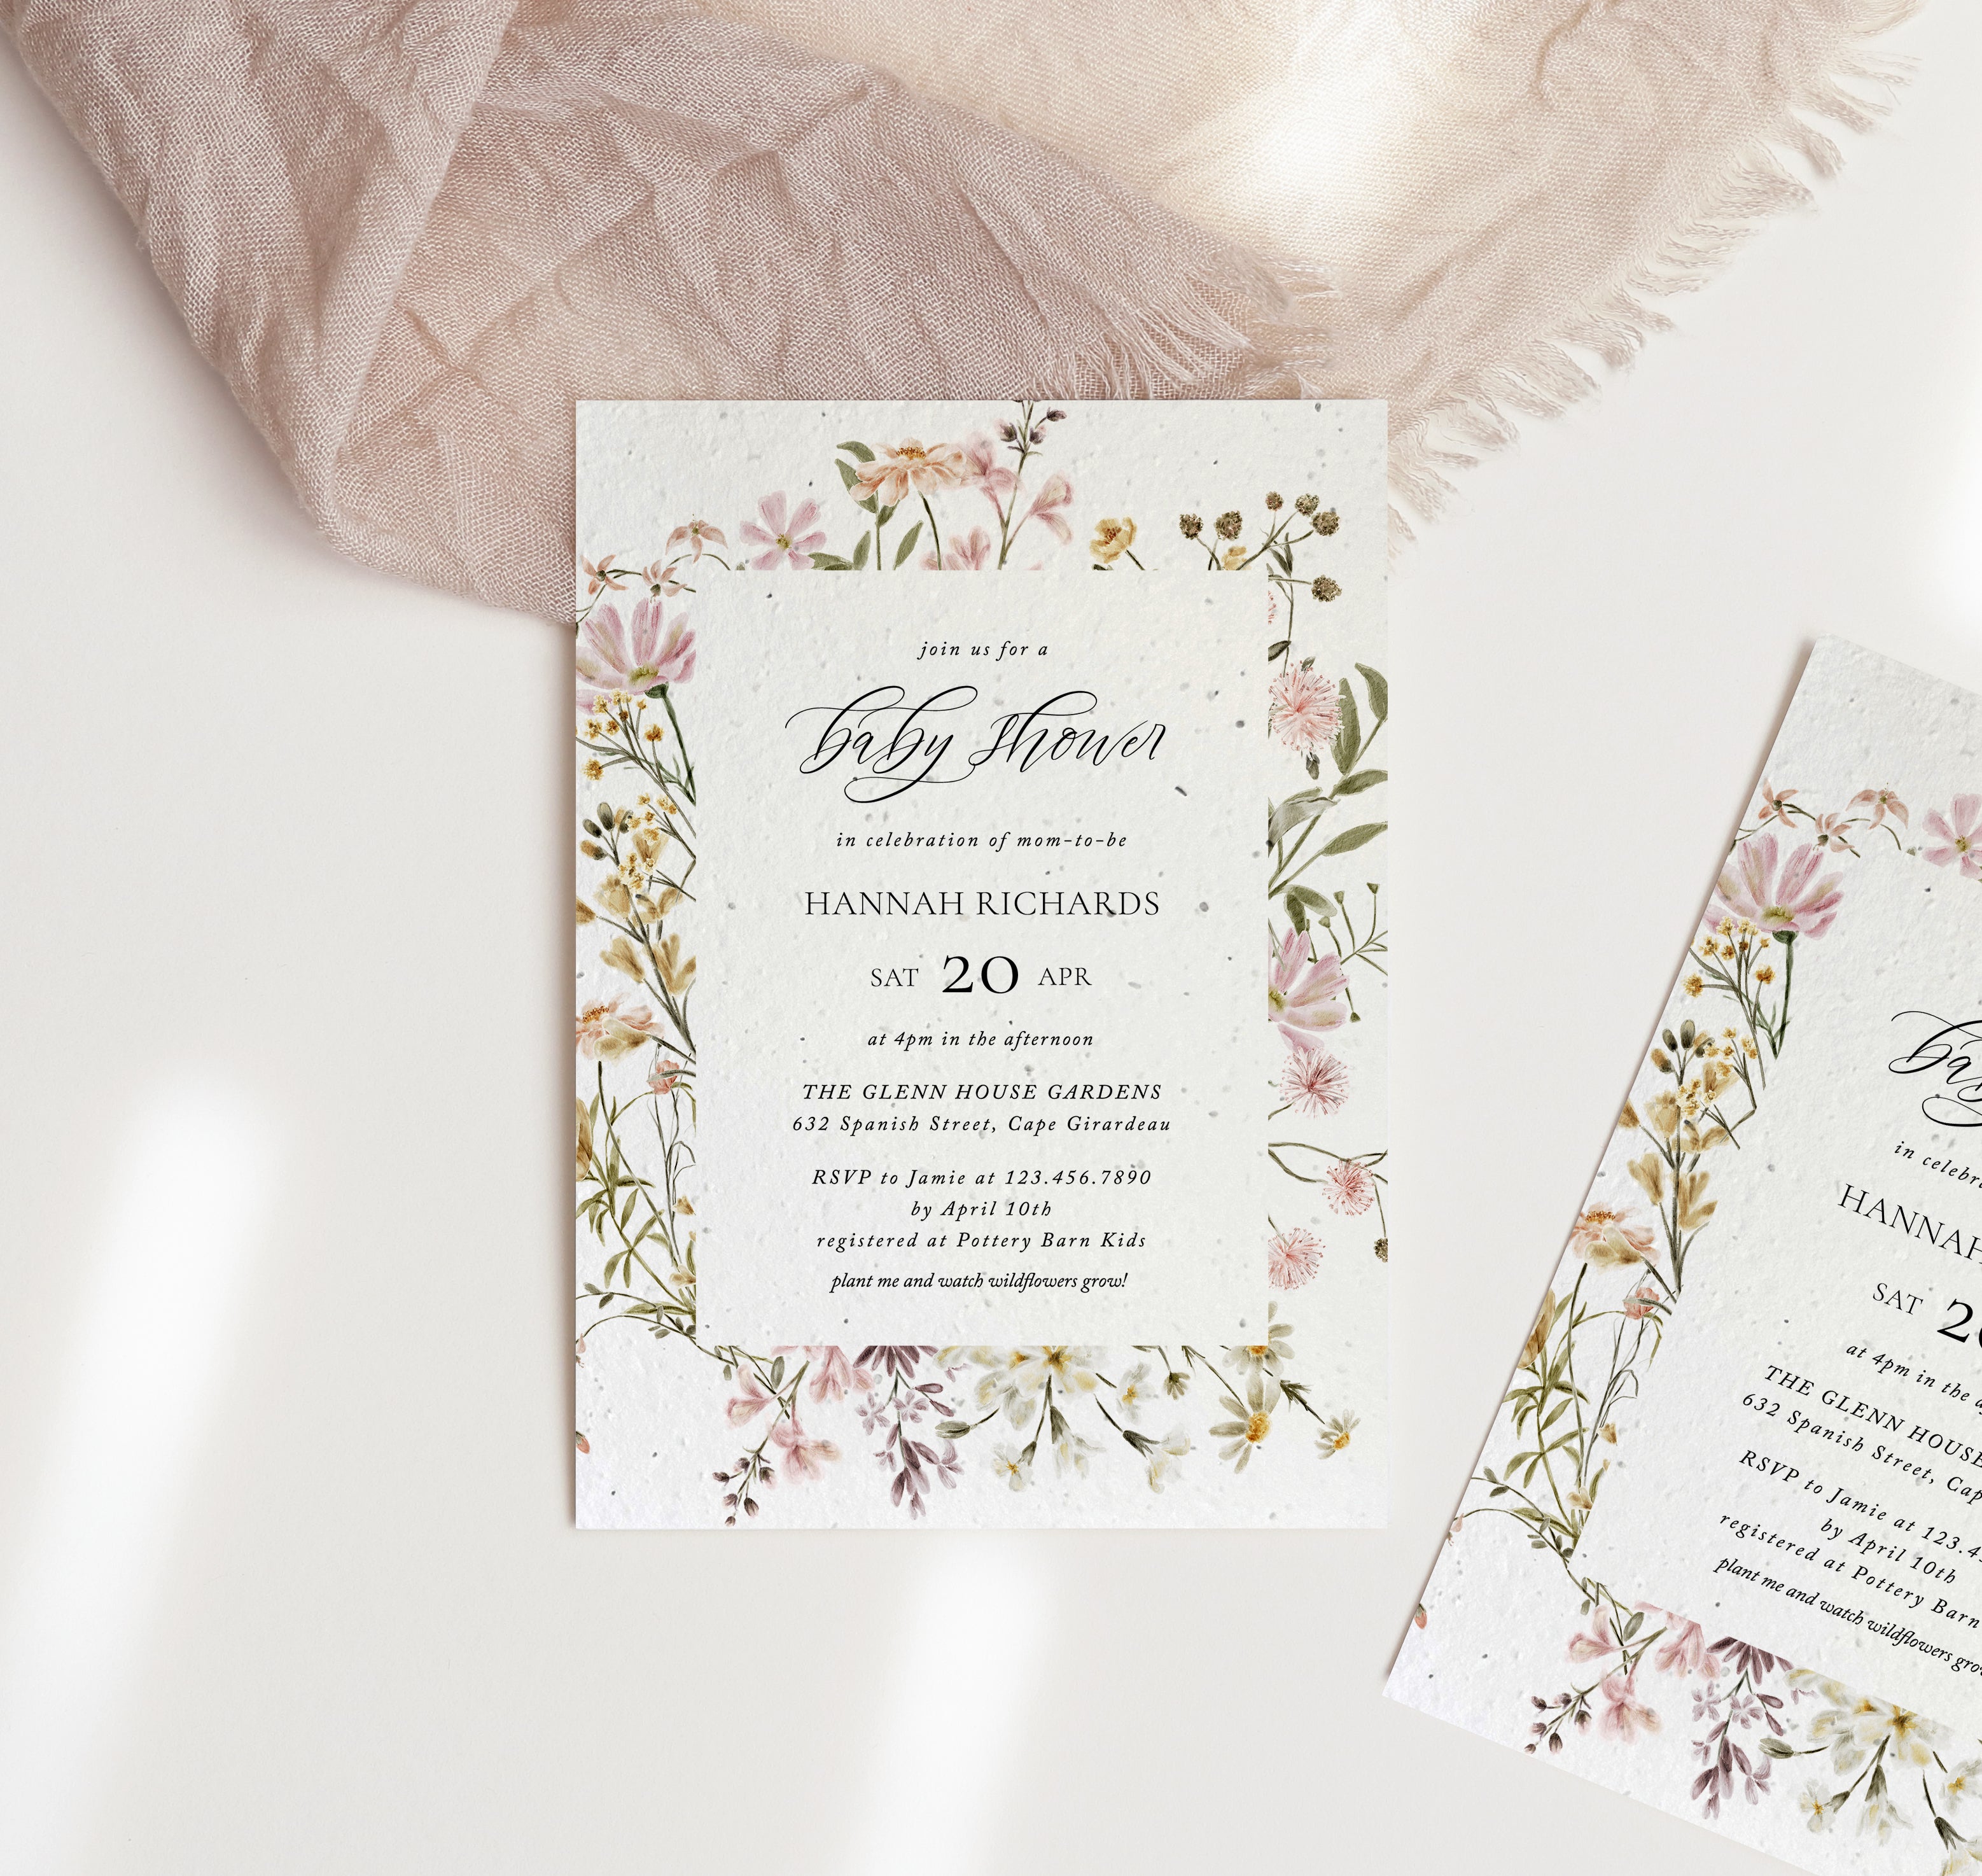 growNOTES™ Wildflower Baby Shower Plantable Invitation - Pink Daisies